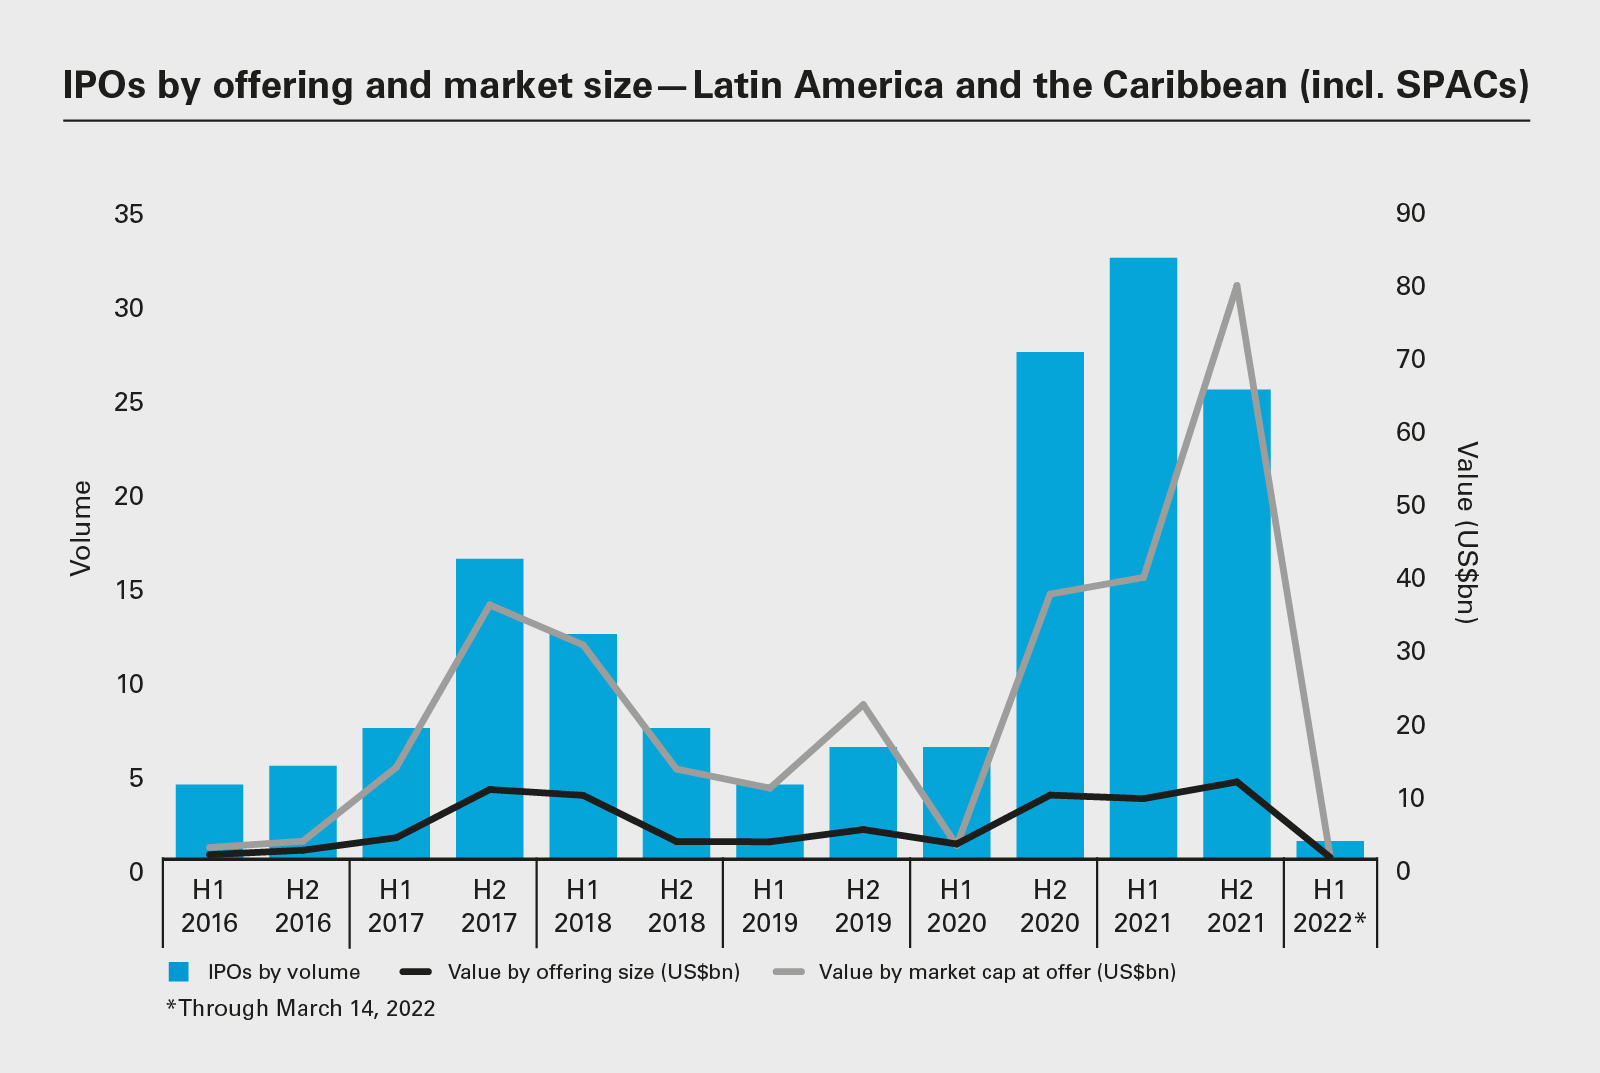 IPOs by offering and market size—Latin America and the Caribbean (incl. SPACs)